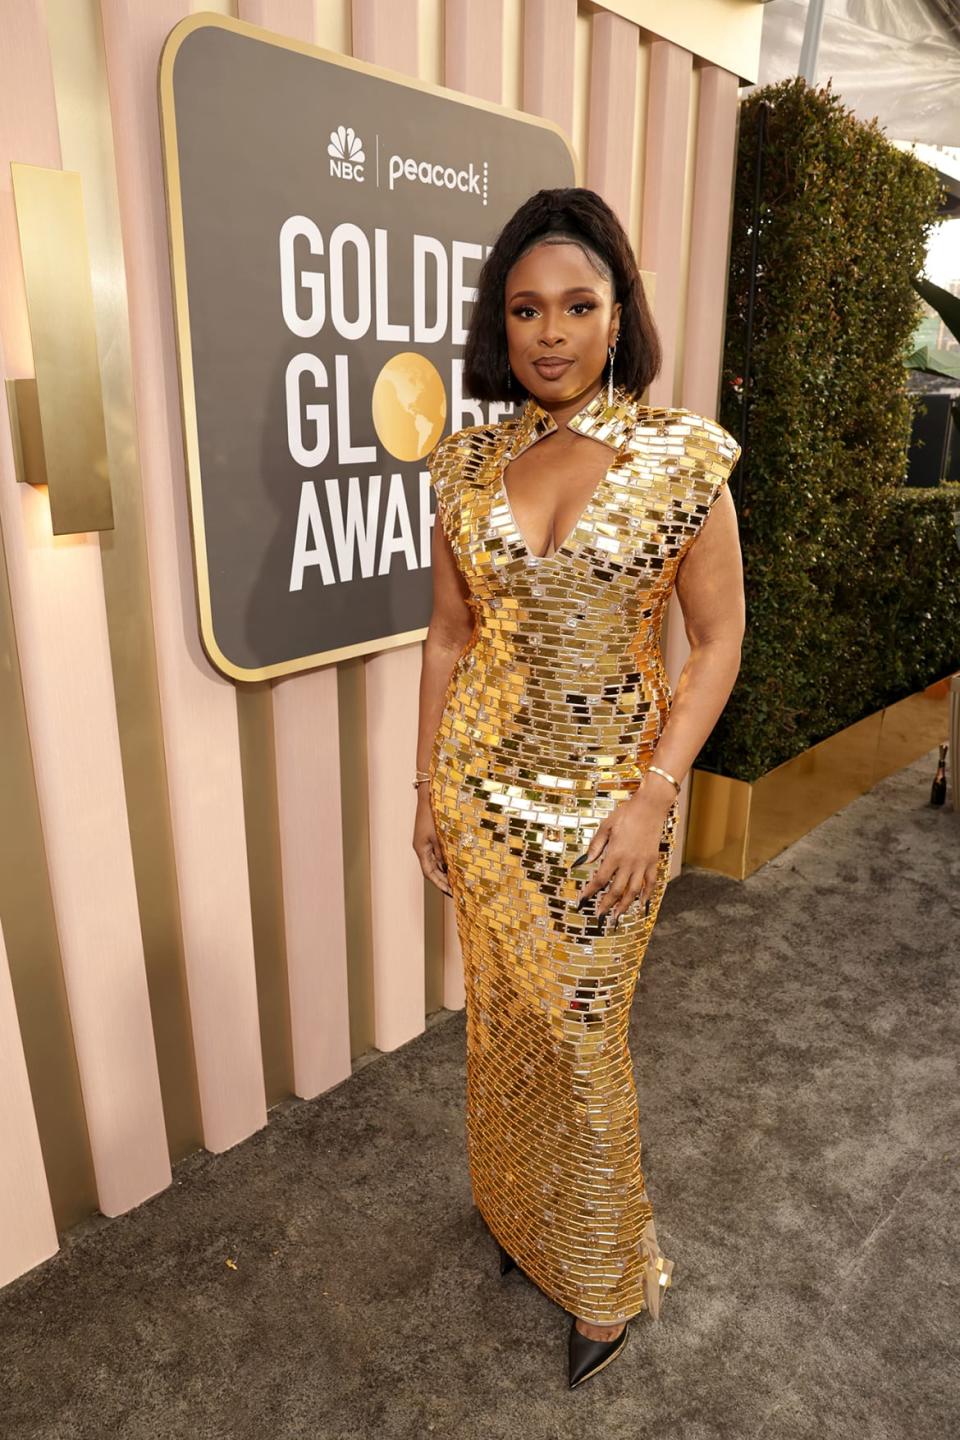 <div class="inline-image__caption"><p>Jennifer Hudson arrives at the 80th Annual Golden Globe Awards held at the Beverly Hilton Hotel on January 10, 2023 in Beverly Hills, California.</p></div> <div class="inline-image__credit">Todd Williamson/NBC</div>